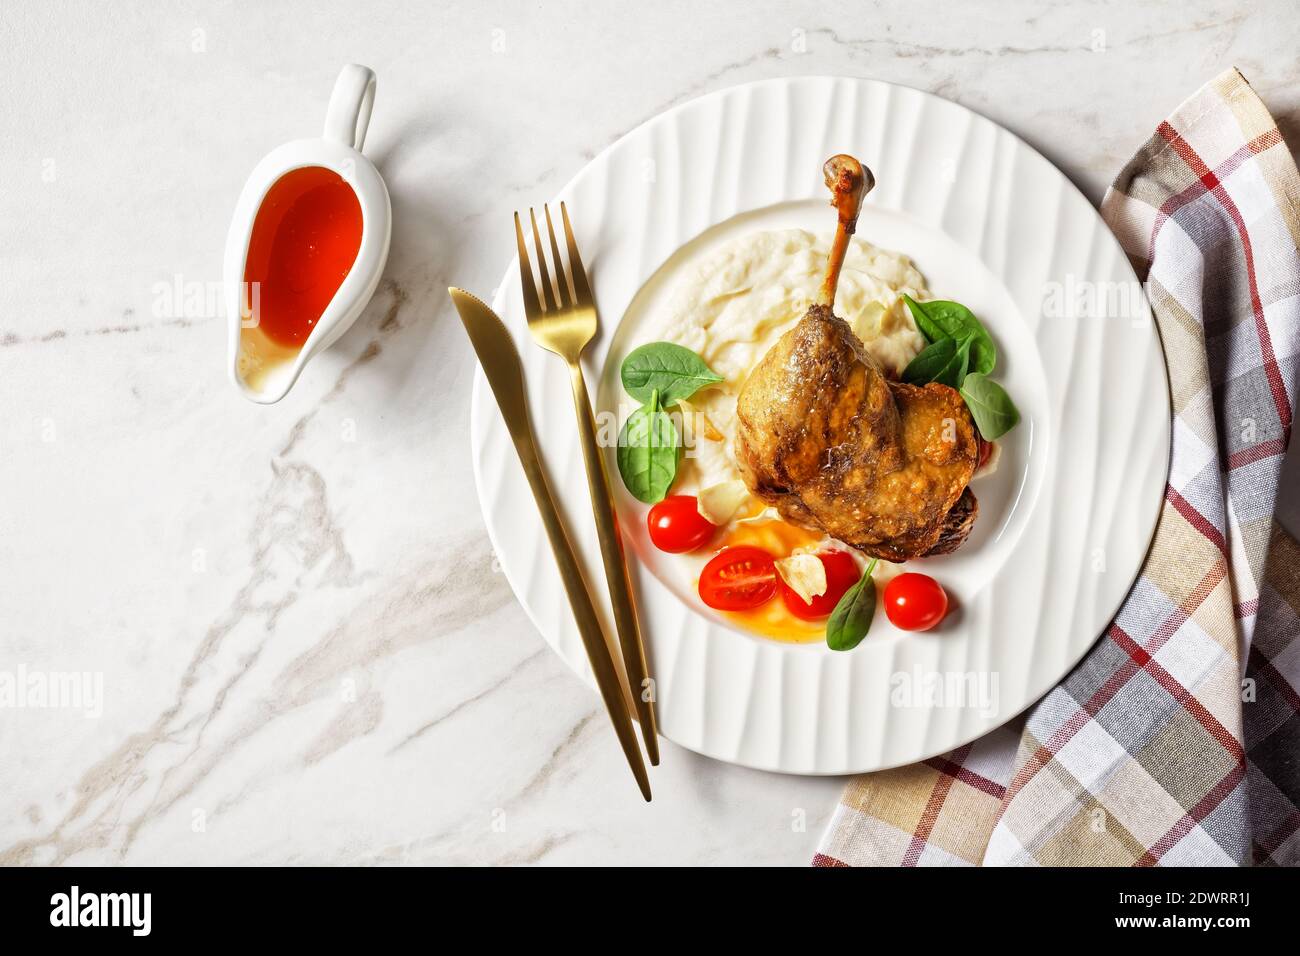 Roasted duck leg - duck confit with parsnip puree and orange sauce cherry tomatoes, fresh spinach leaves served on a white plate with golden cutlery o Stock Photo